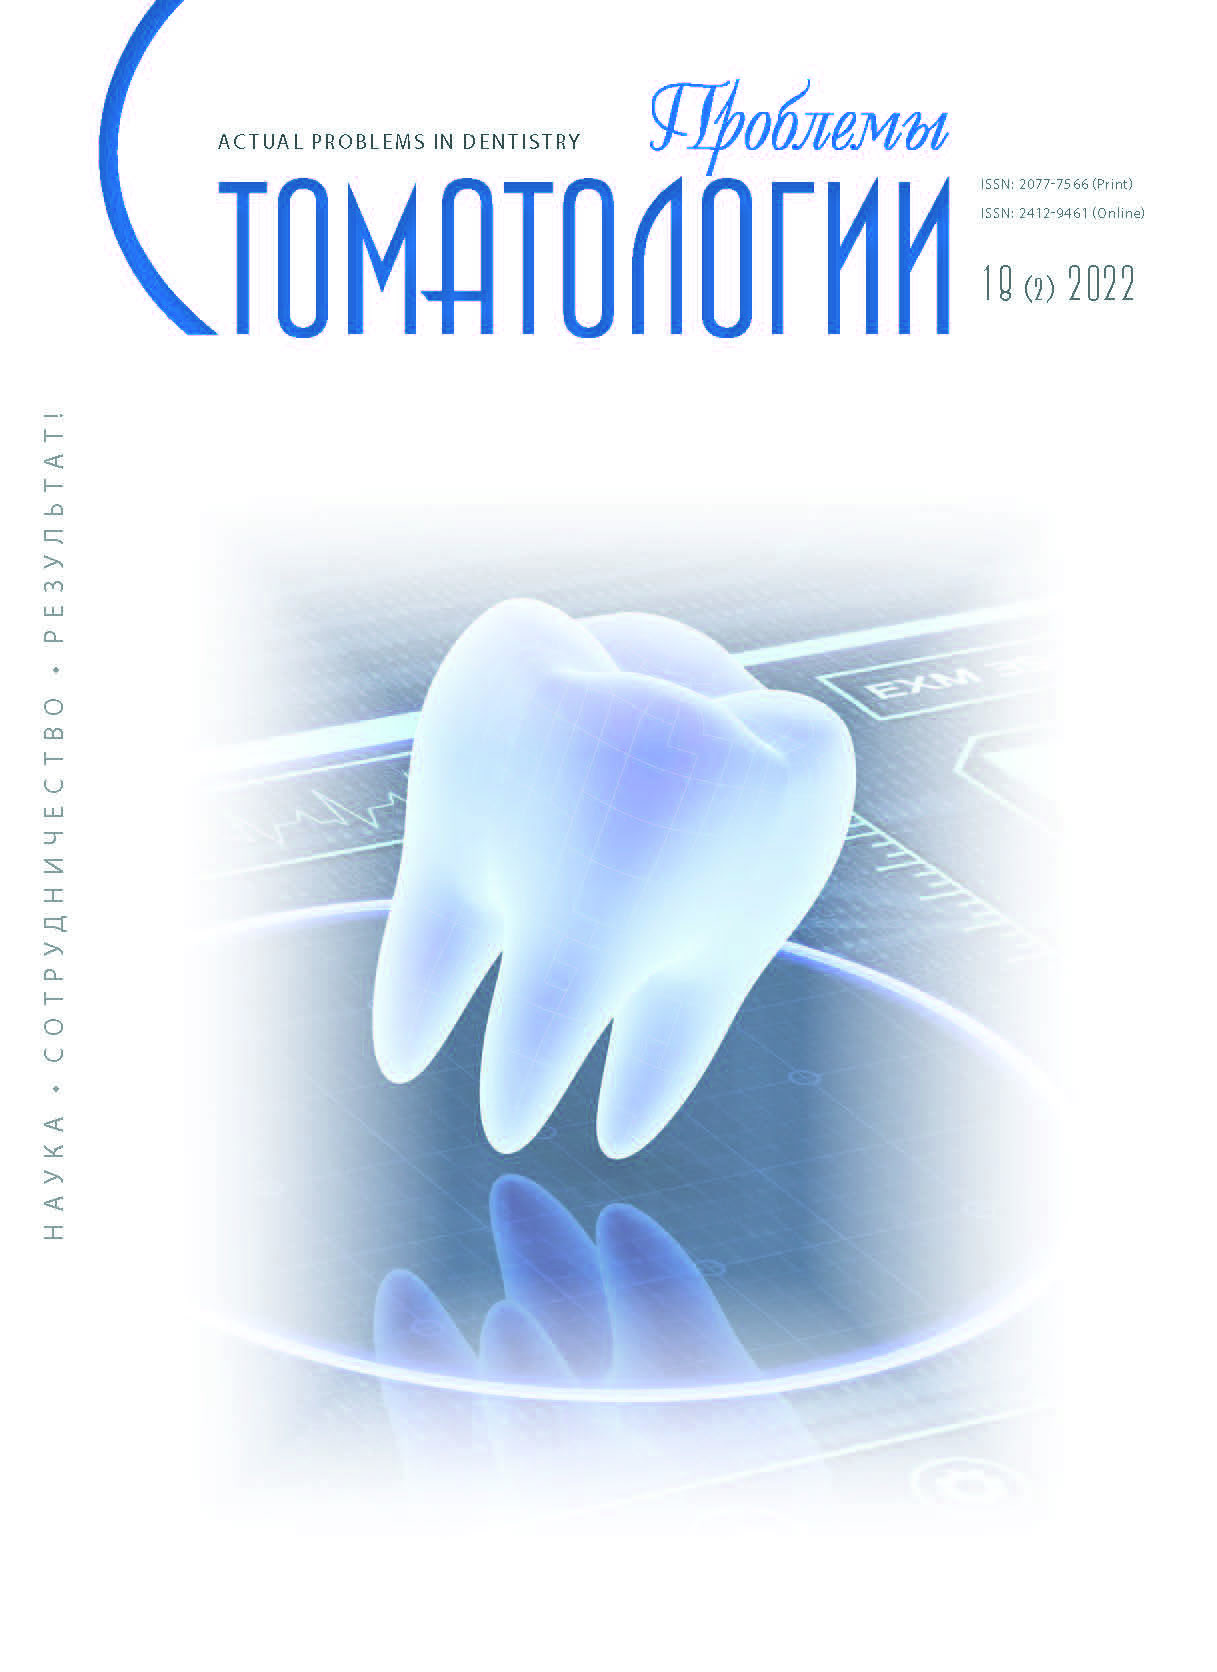                         ASSESSMENT OF THE CONDITION OF THE ORAL CAVITY IN EARLY DIAGNOSIS OF COGNITIVE DEFICITS
            